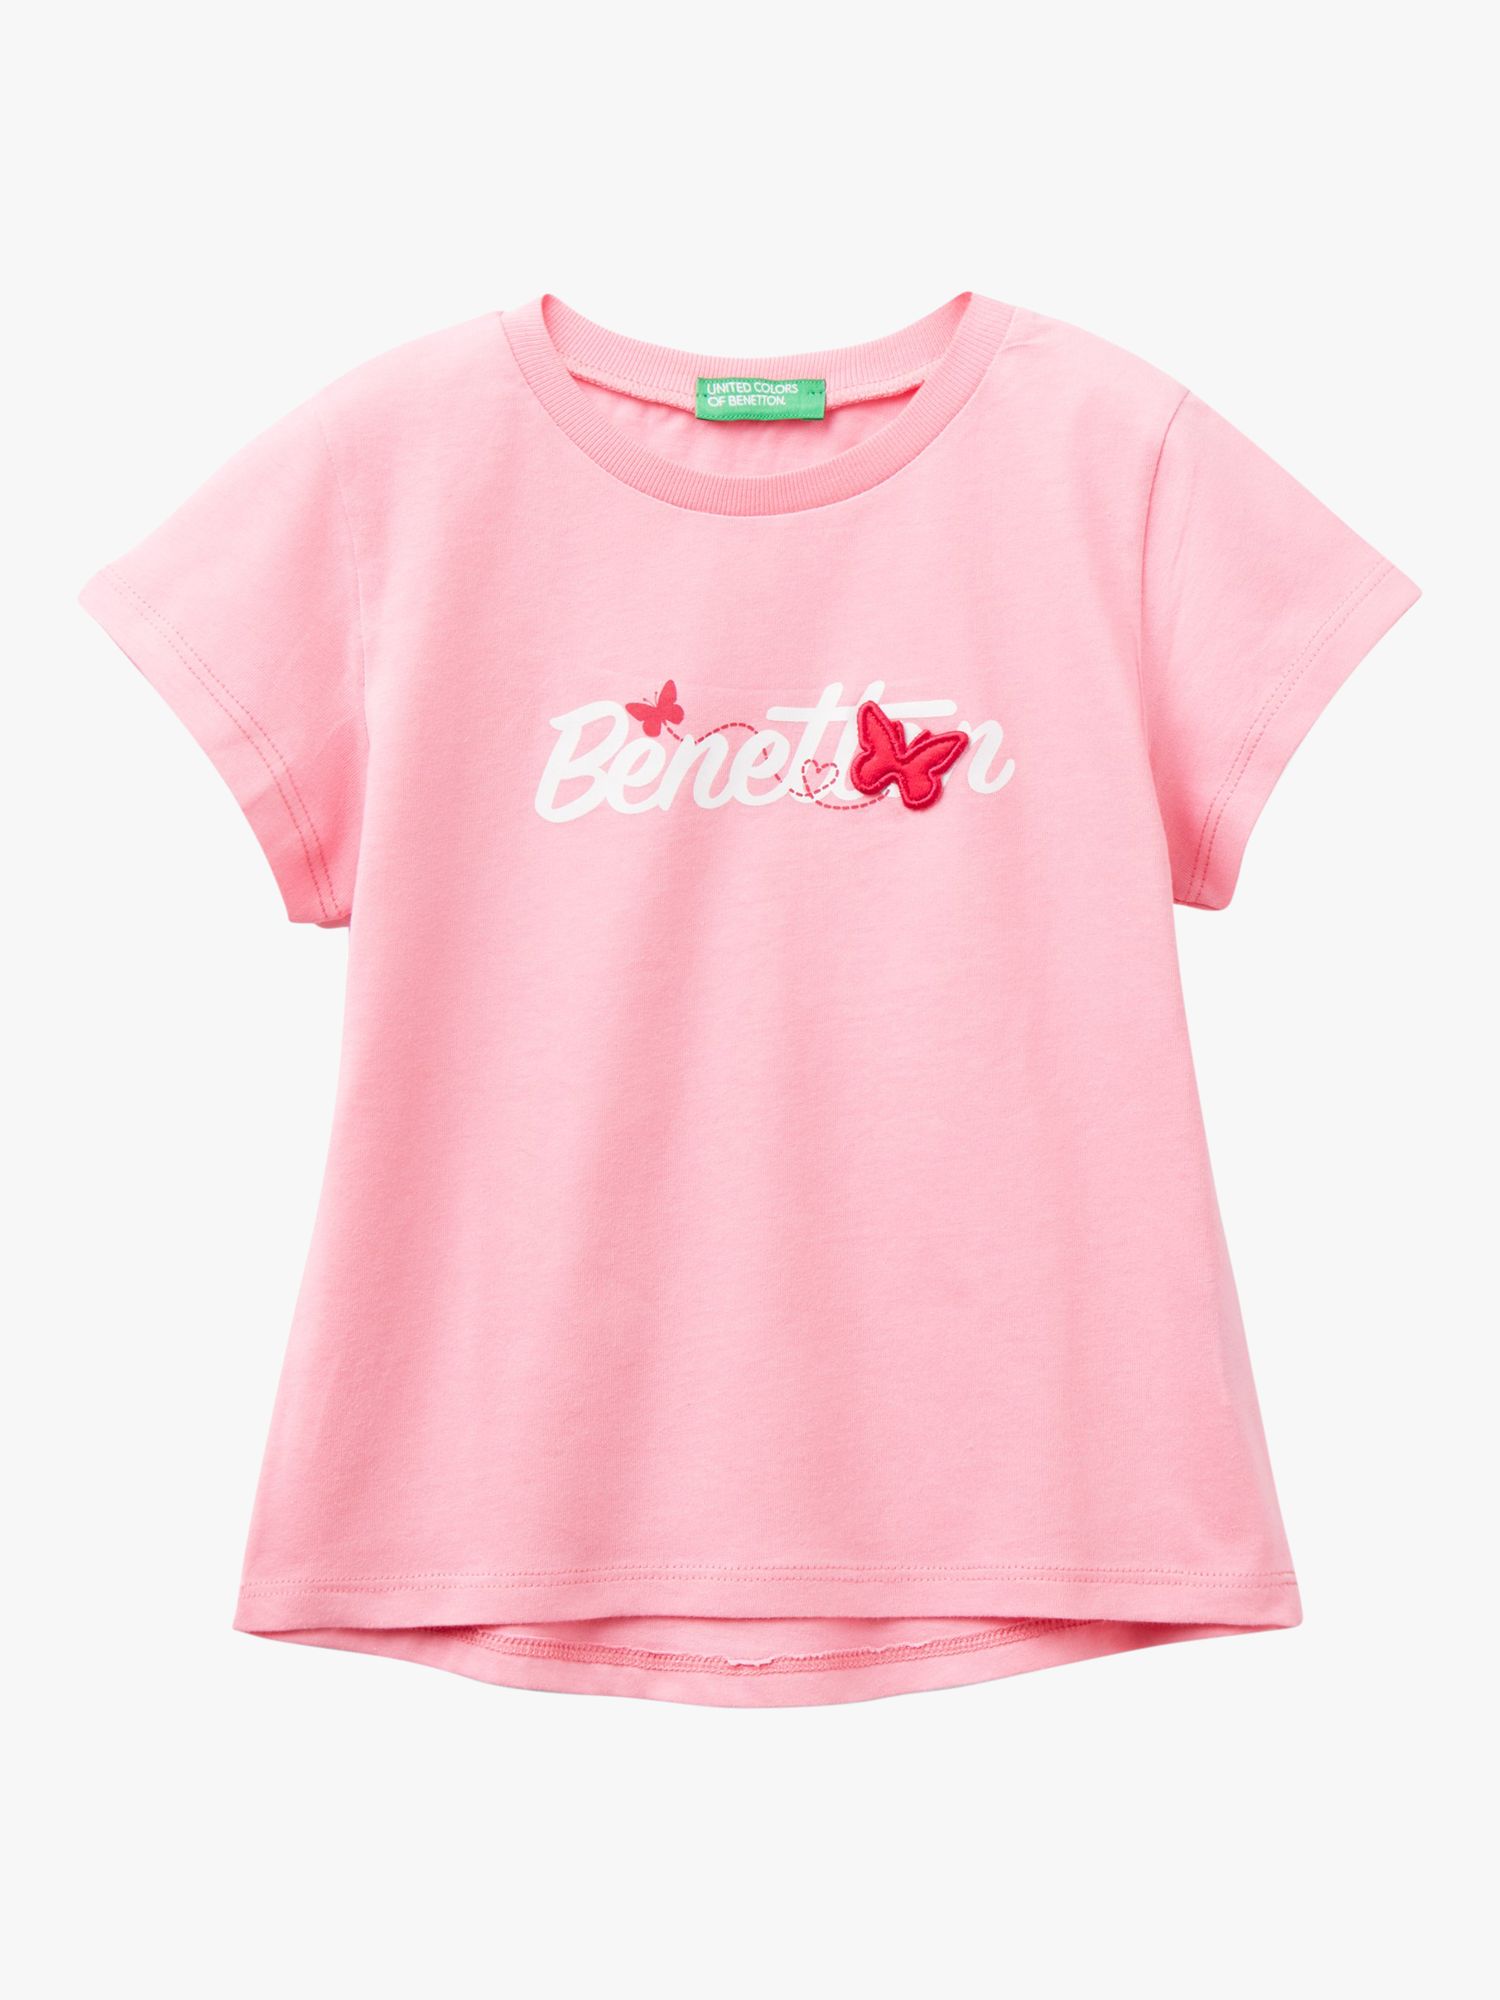 Benetton Kids' Logo Butterfly Patch Crew Neck T-Shirt, Pink, 2-3 years